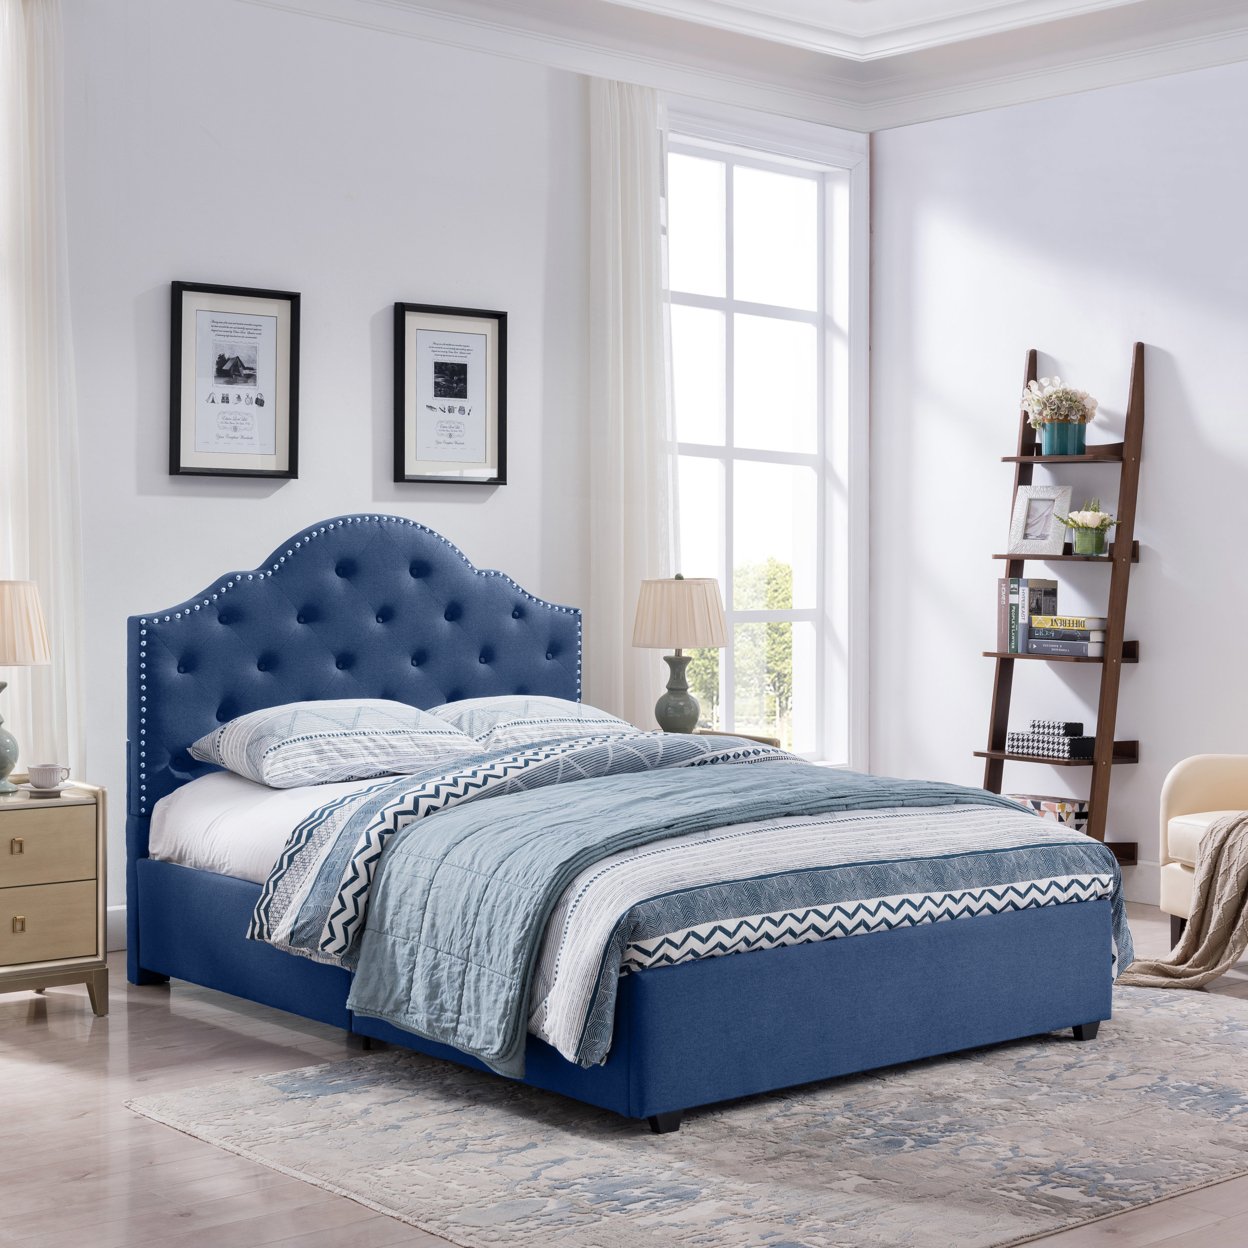 Gentry Contemporary Button-Tufted Upholstered Queen Bed Frame With Nailhead Accents - Navy